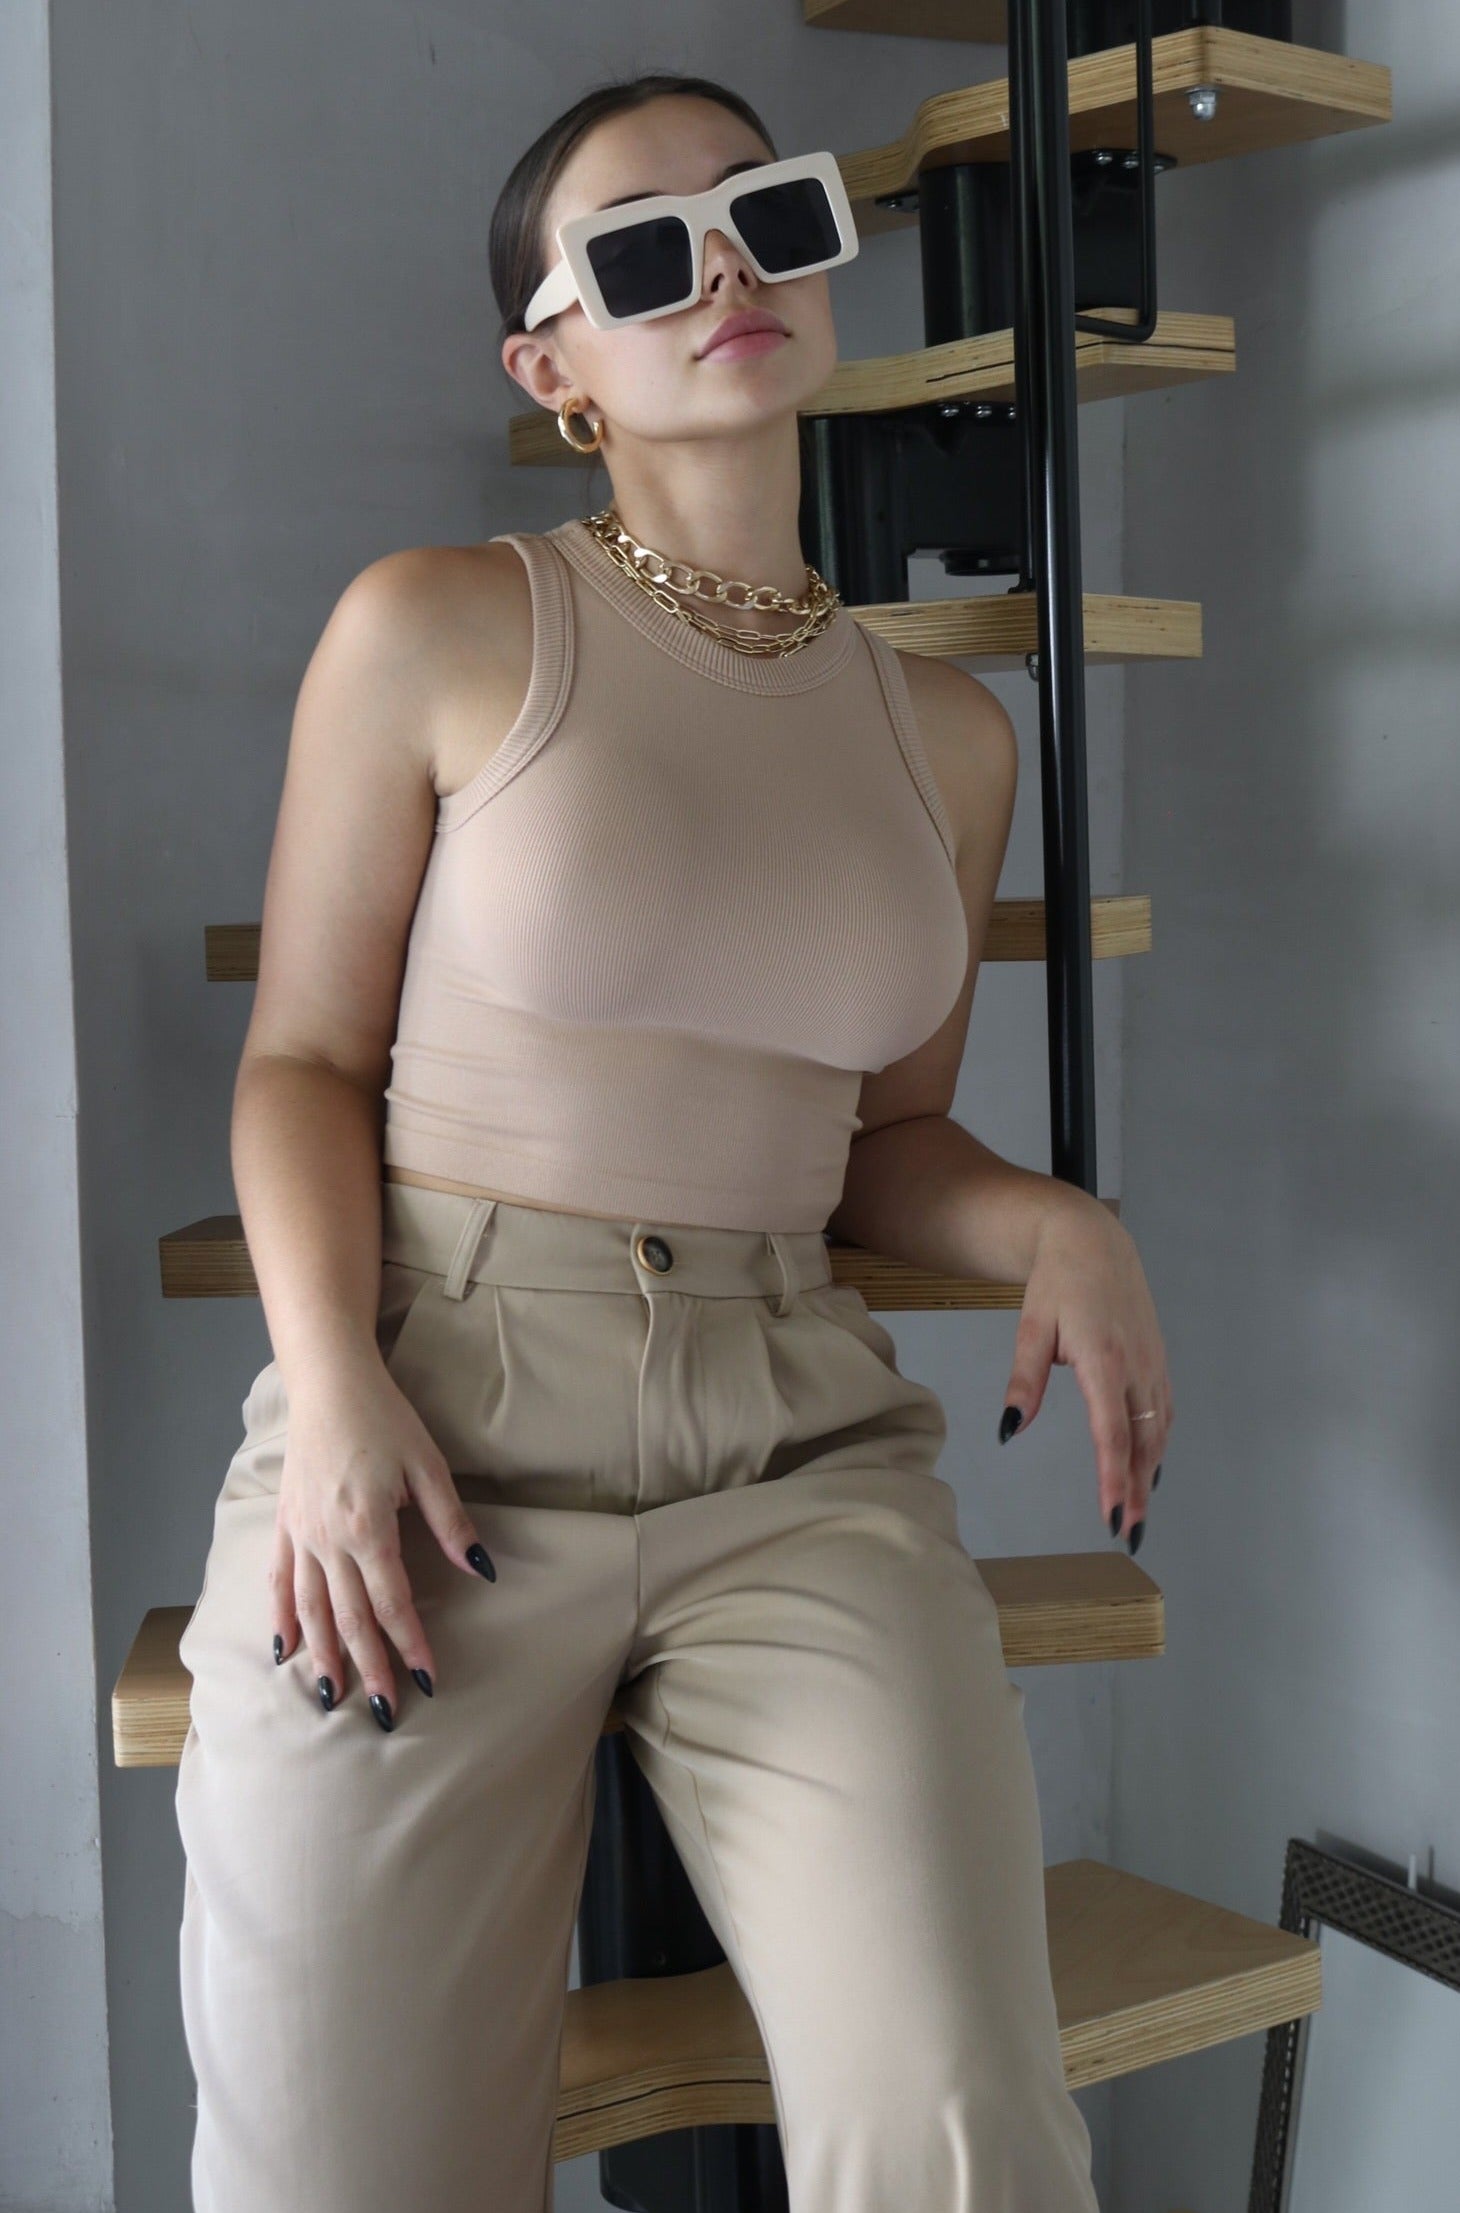 Ribbed Muscle Tank Top in Nude. Scarlette The Label, an online fashion boutique for women.